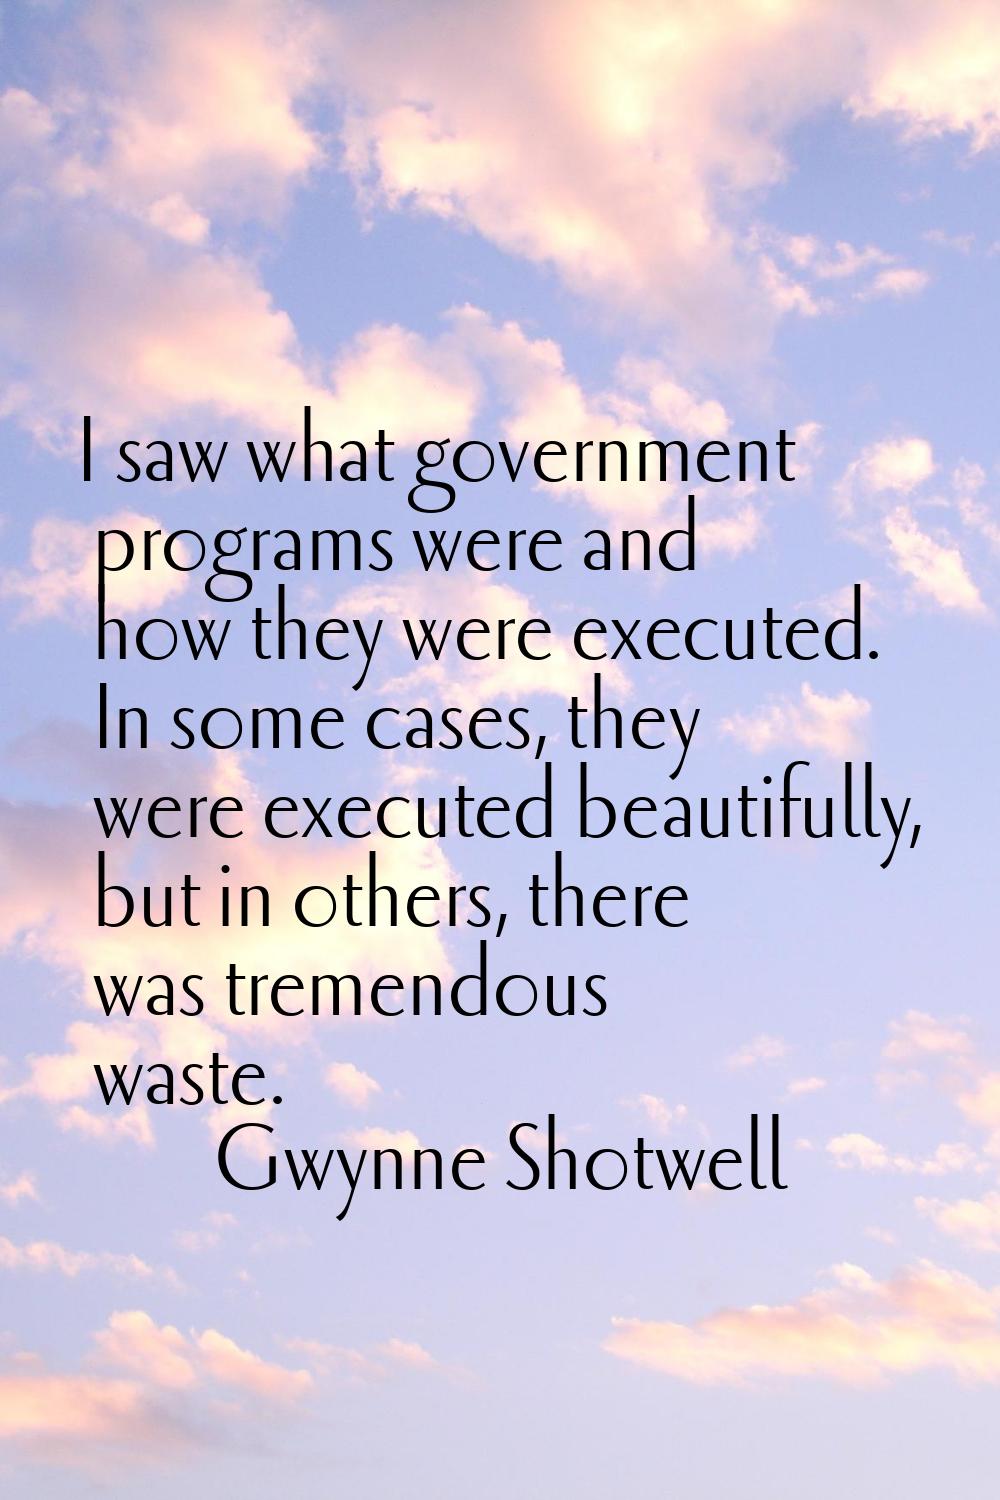 I saw what government programs were and how they were executed. In some cases, they were executed b